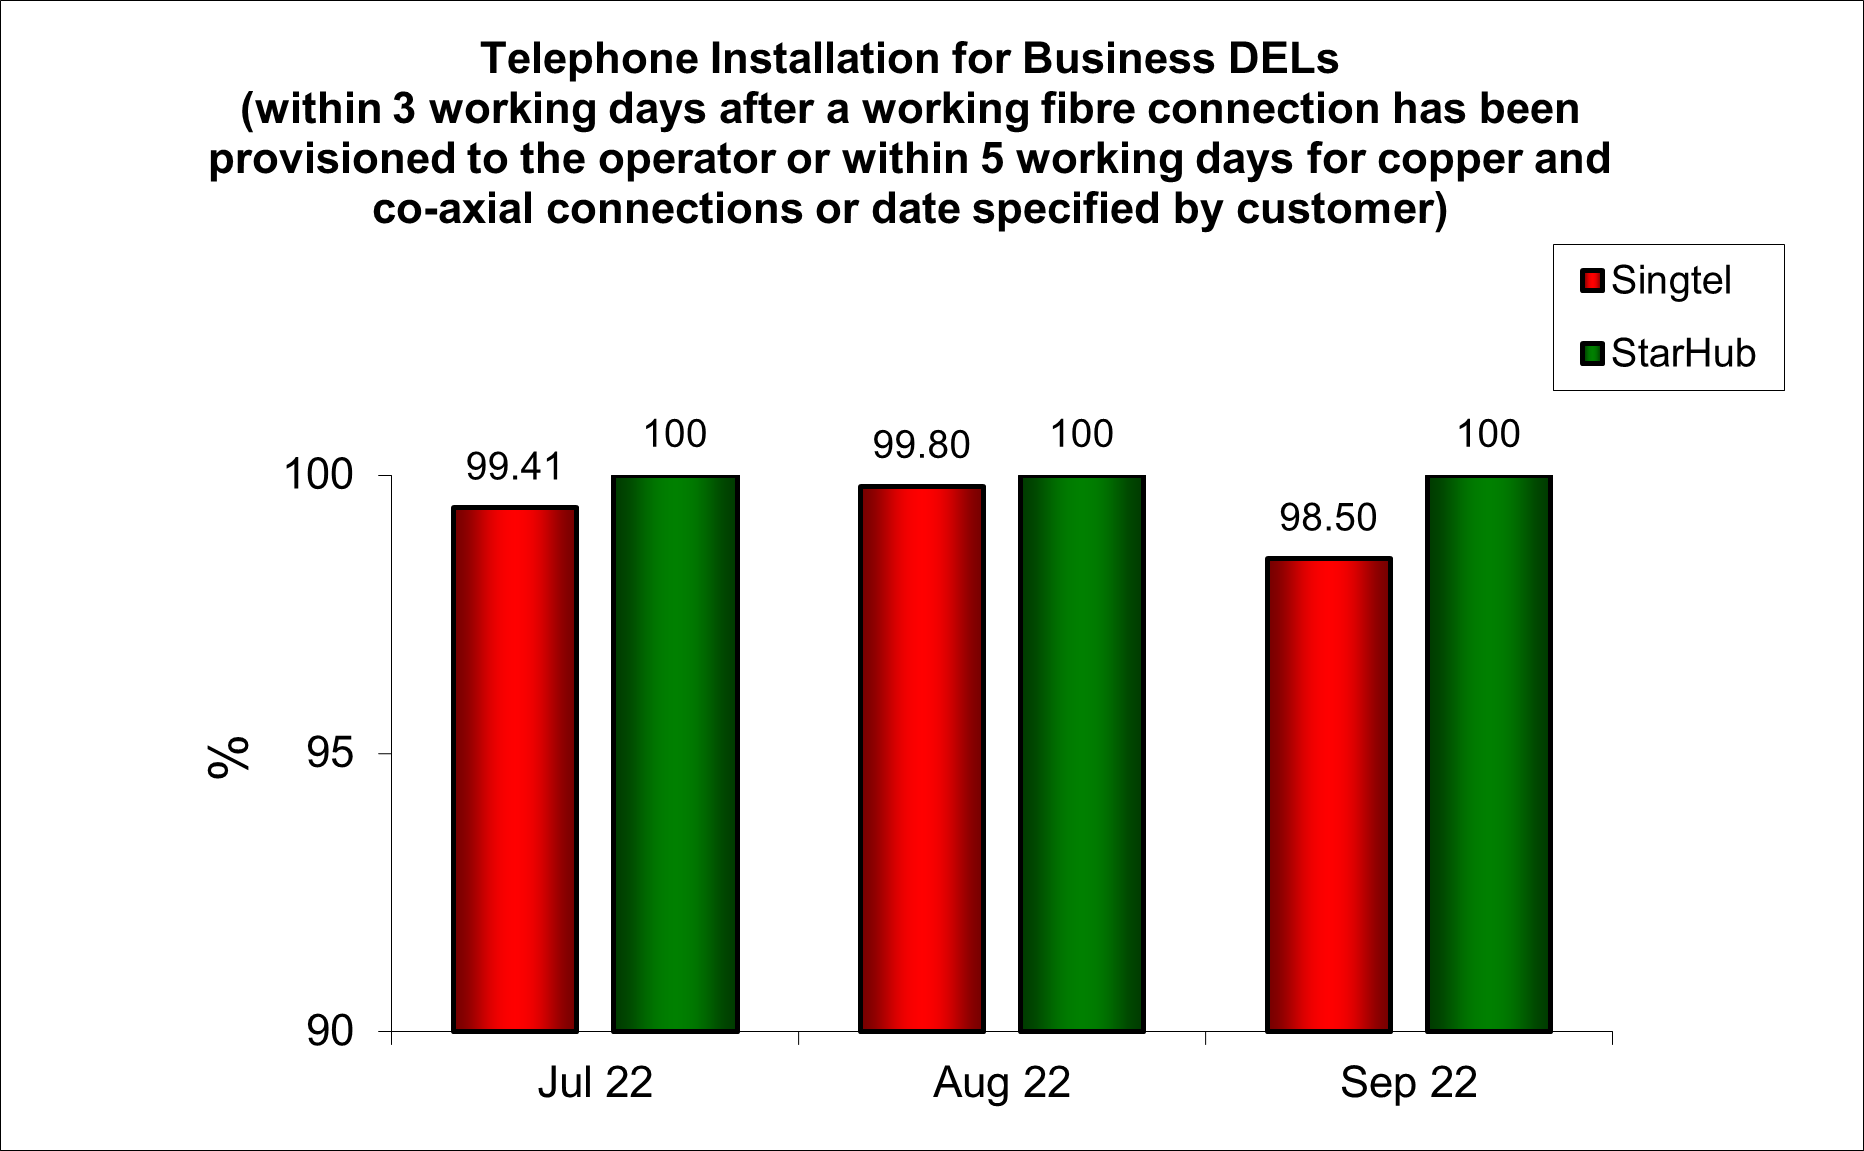 Telephone Installation for Business DELs in Singapore Q3 2022